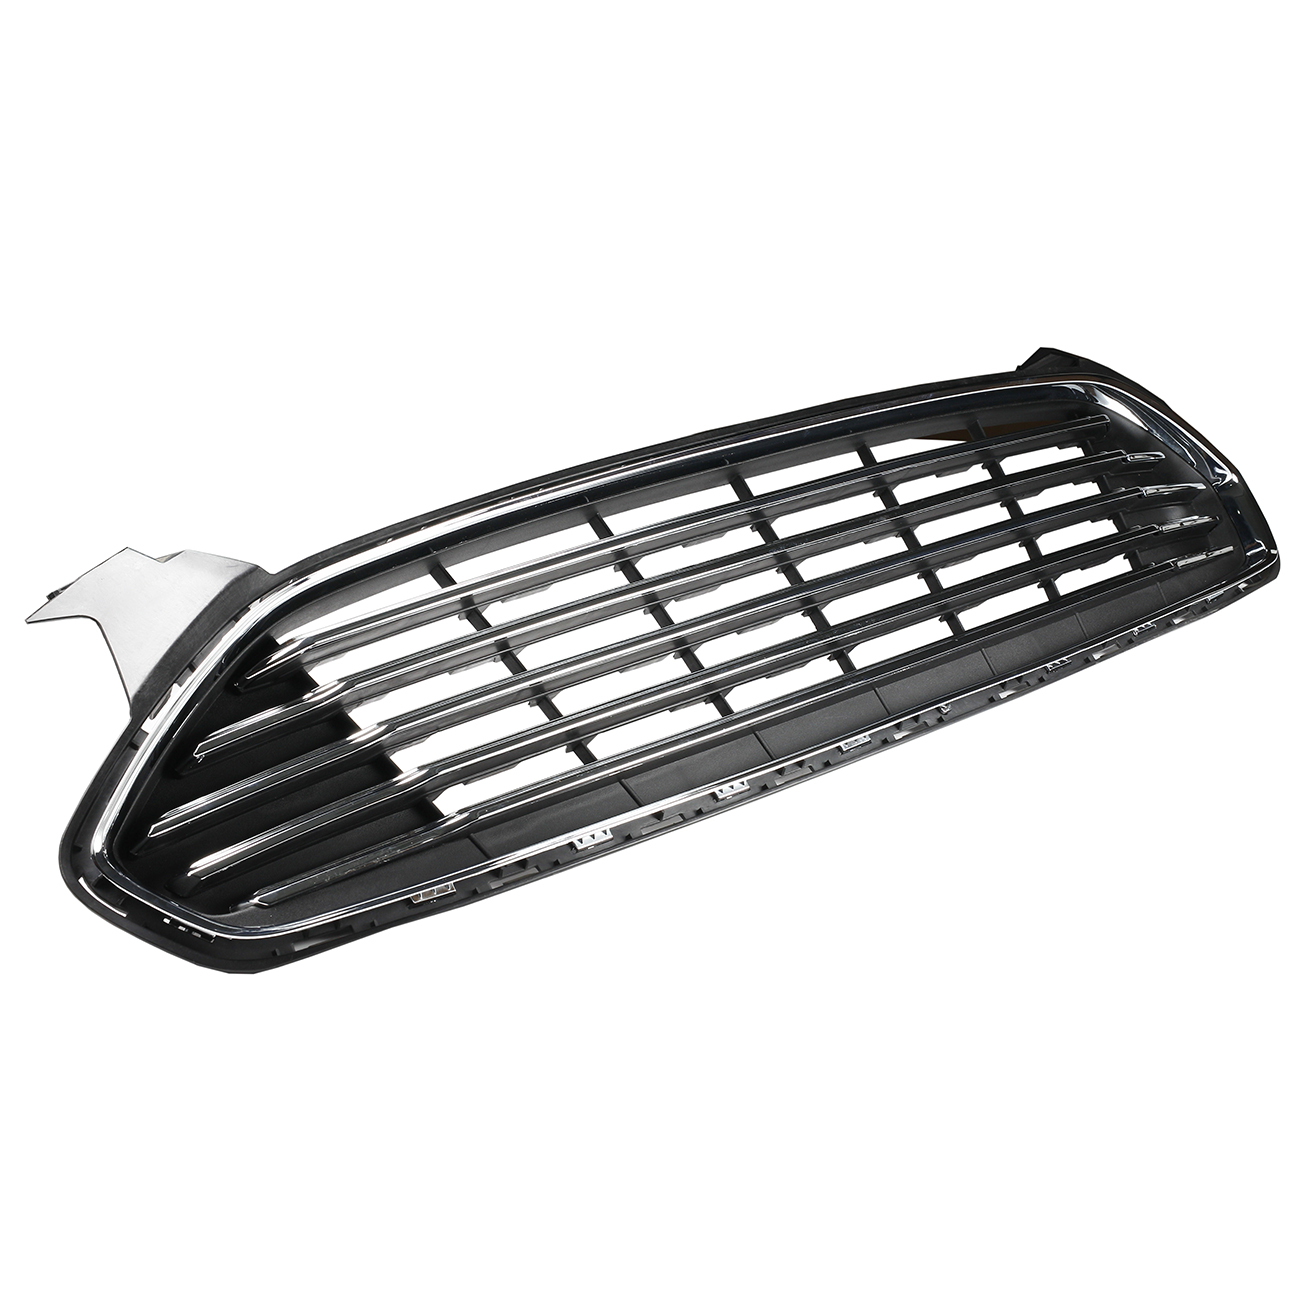 Used for fusion 2013 grille